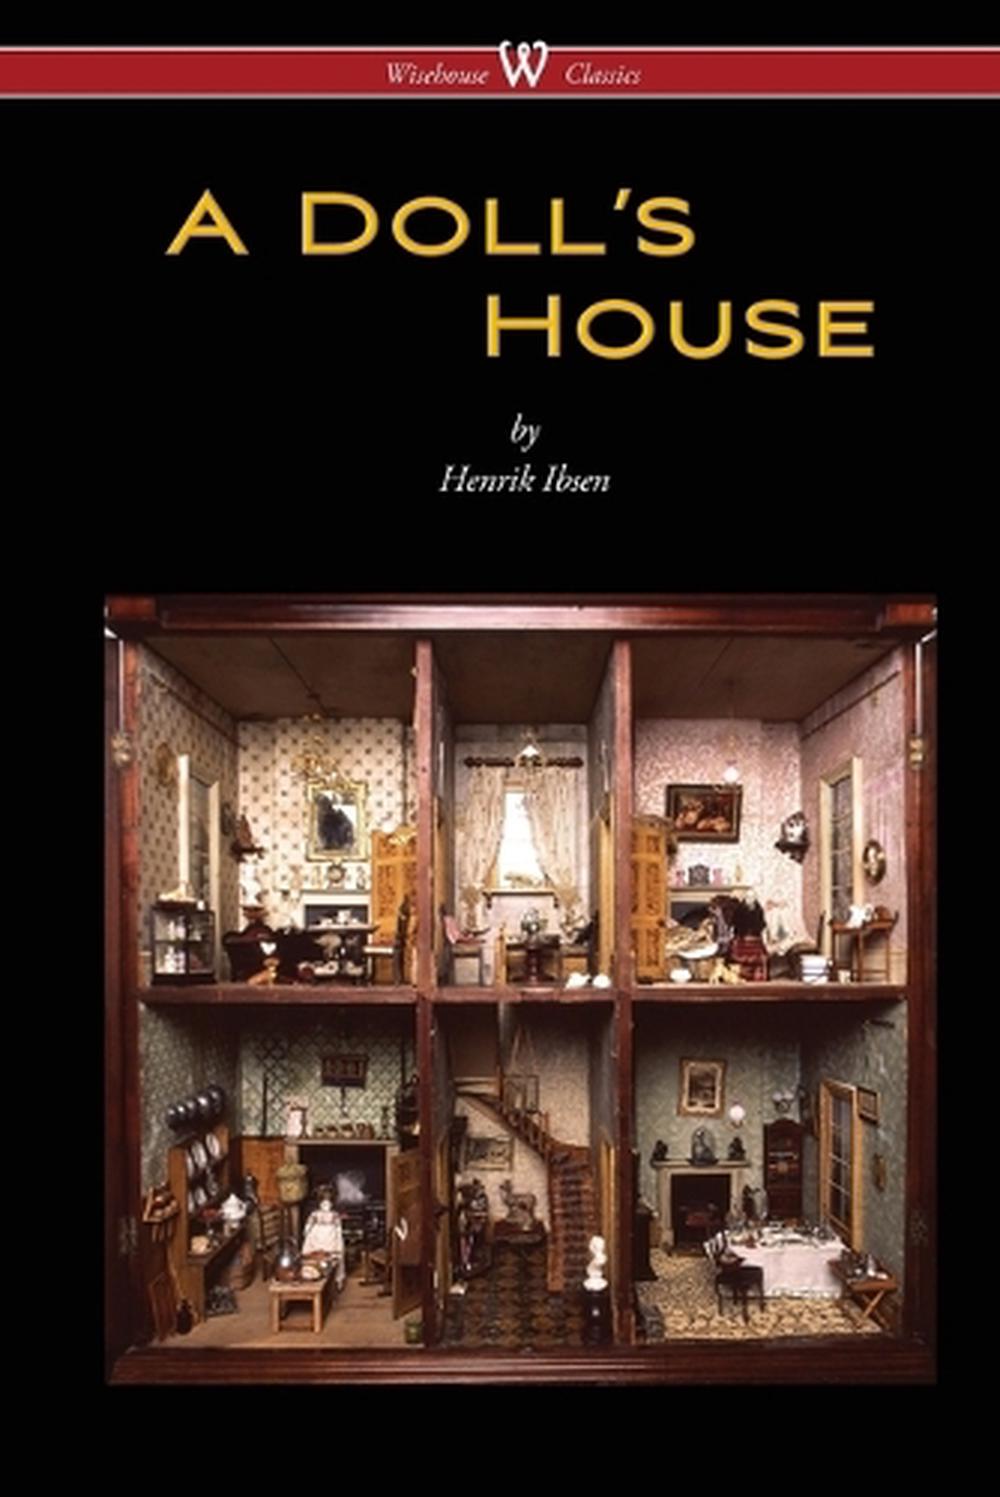 book review for a doll's house